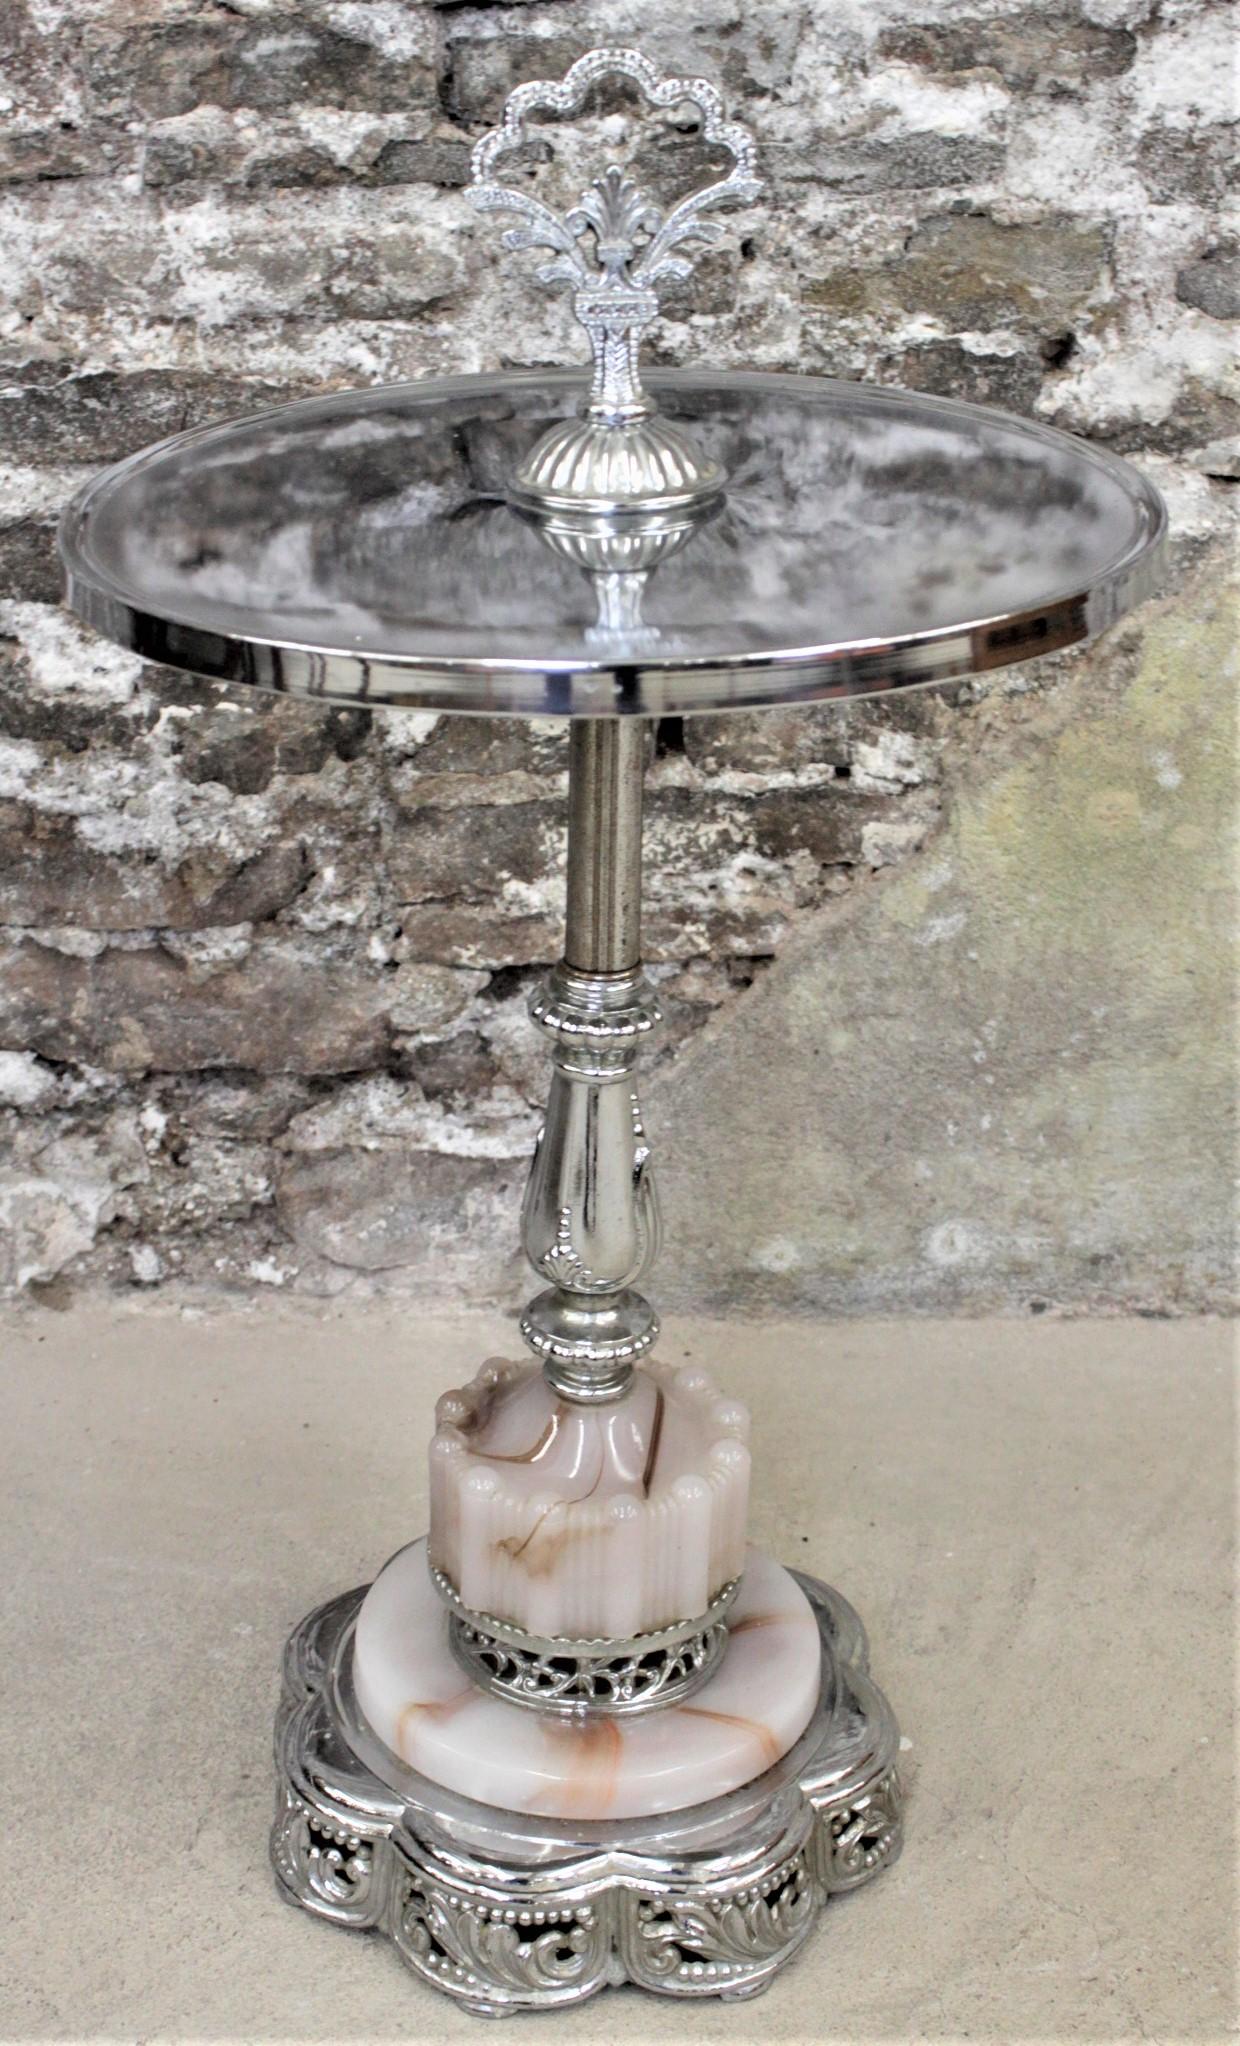 Dating from the mid-20th century, and done in an Art Deco style, this chrome and swirled alabaster colored glass smoker's stand is unsigned, but presumed to have been made in the United States. The stand has a functional and decorative chrome handle